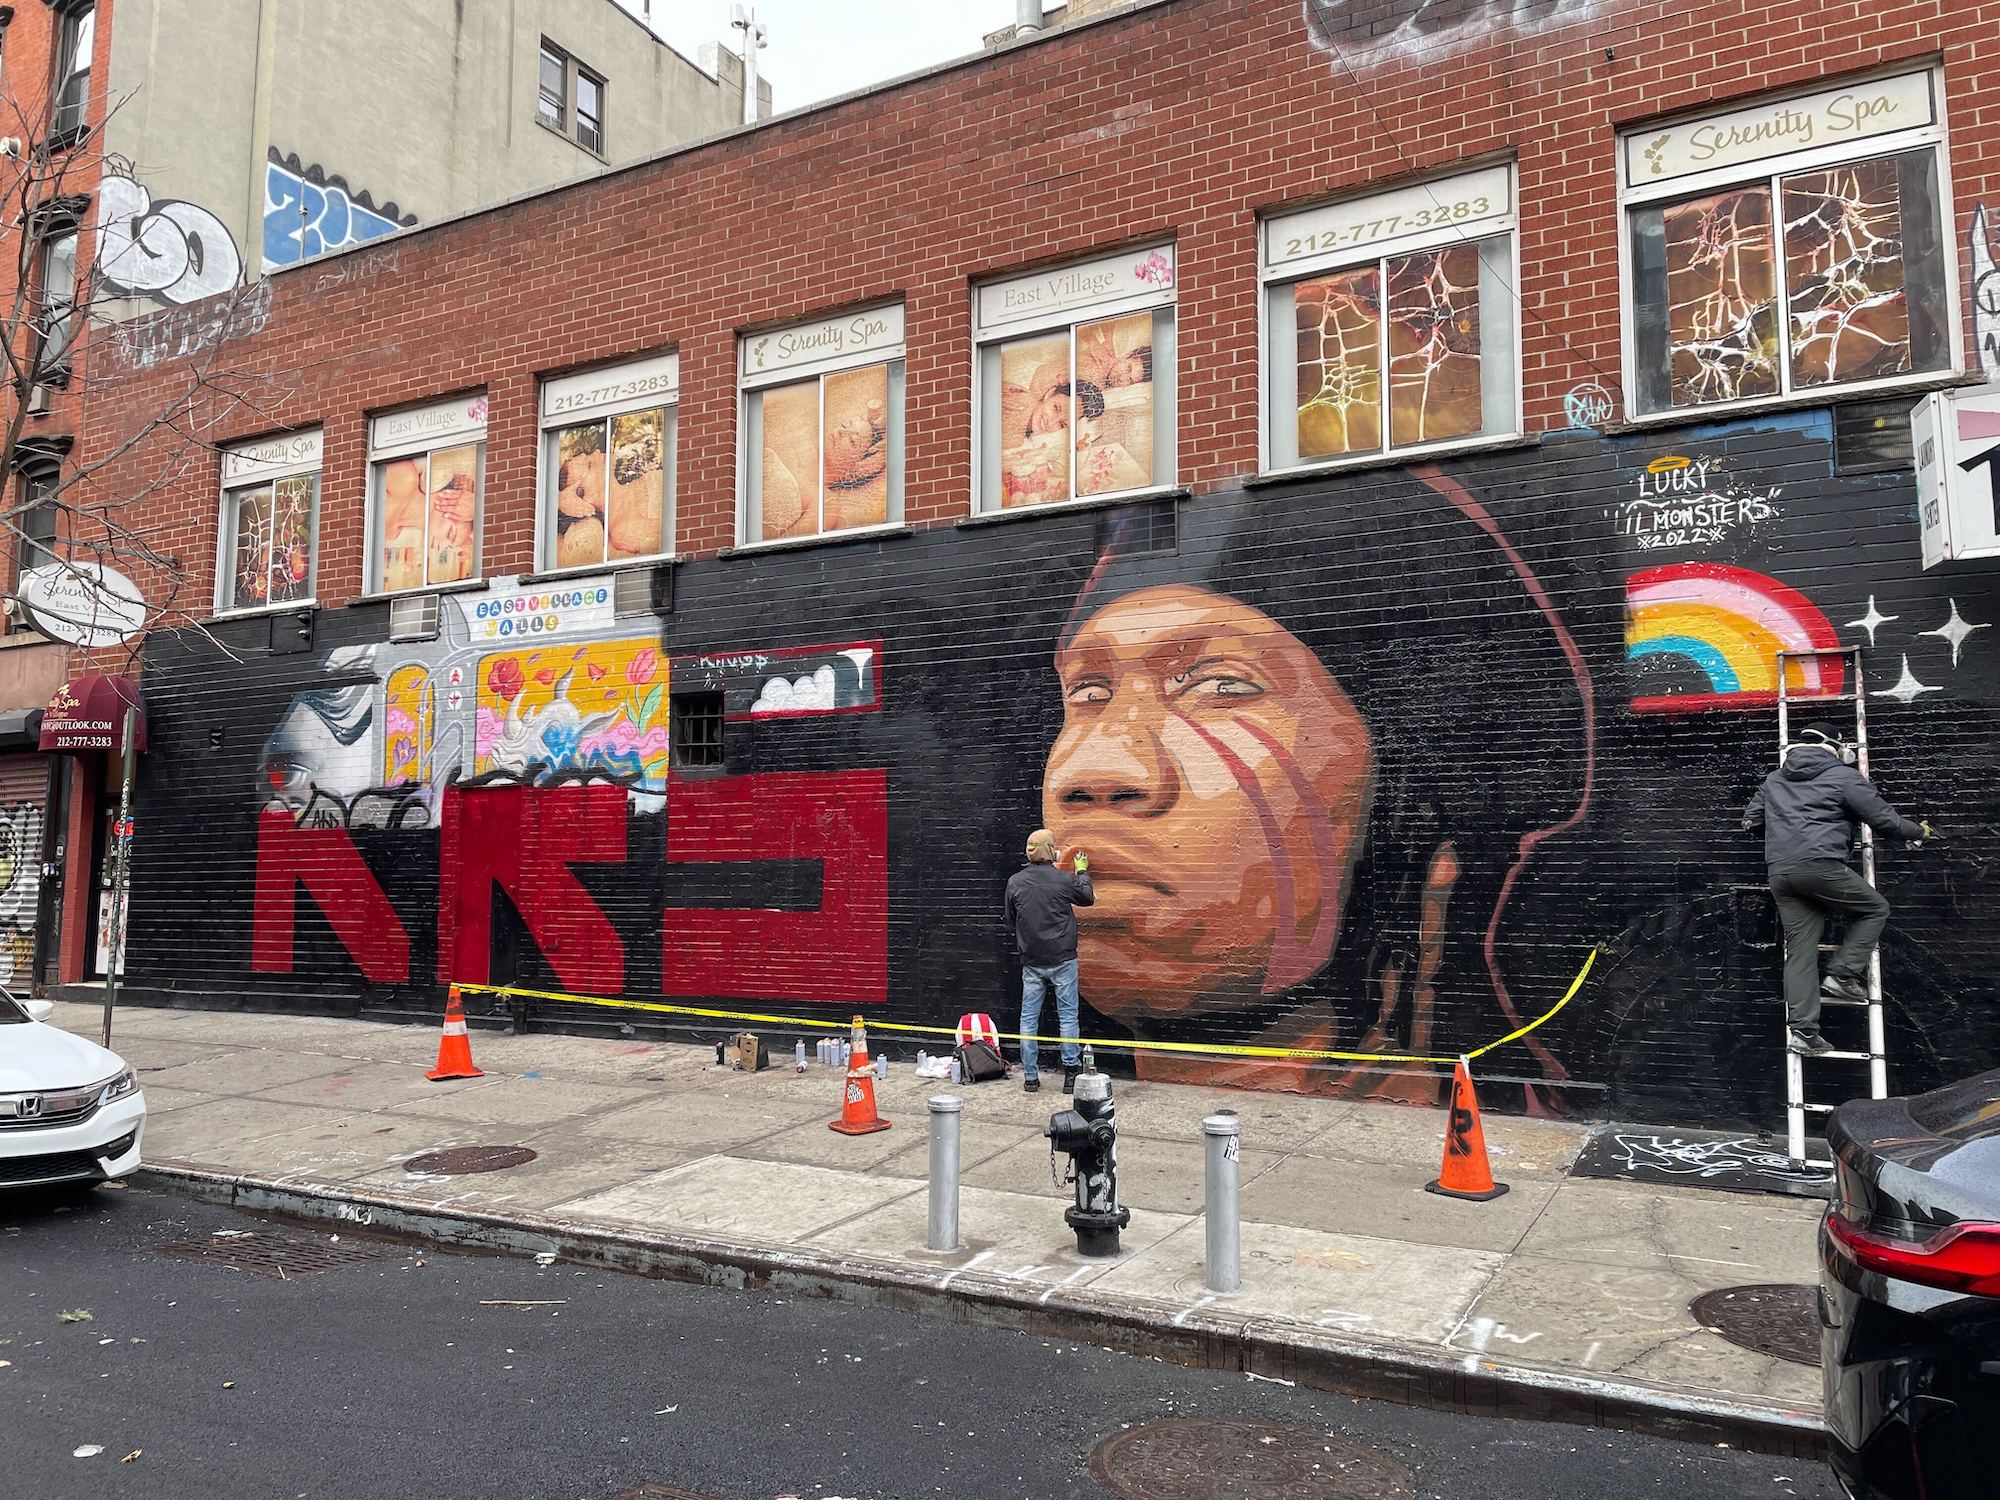 Two people paint a mural of KRS One.